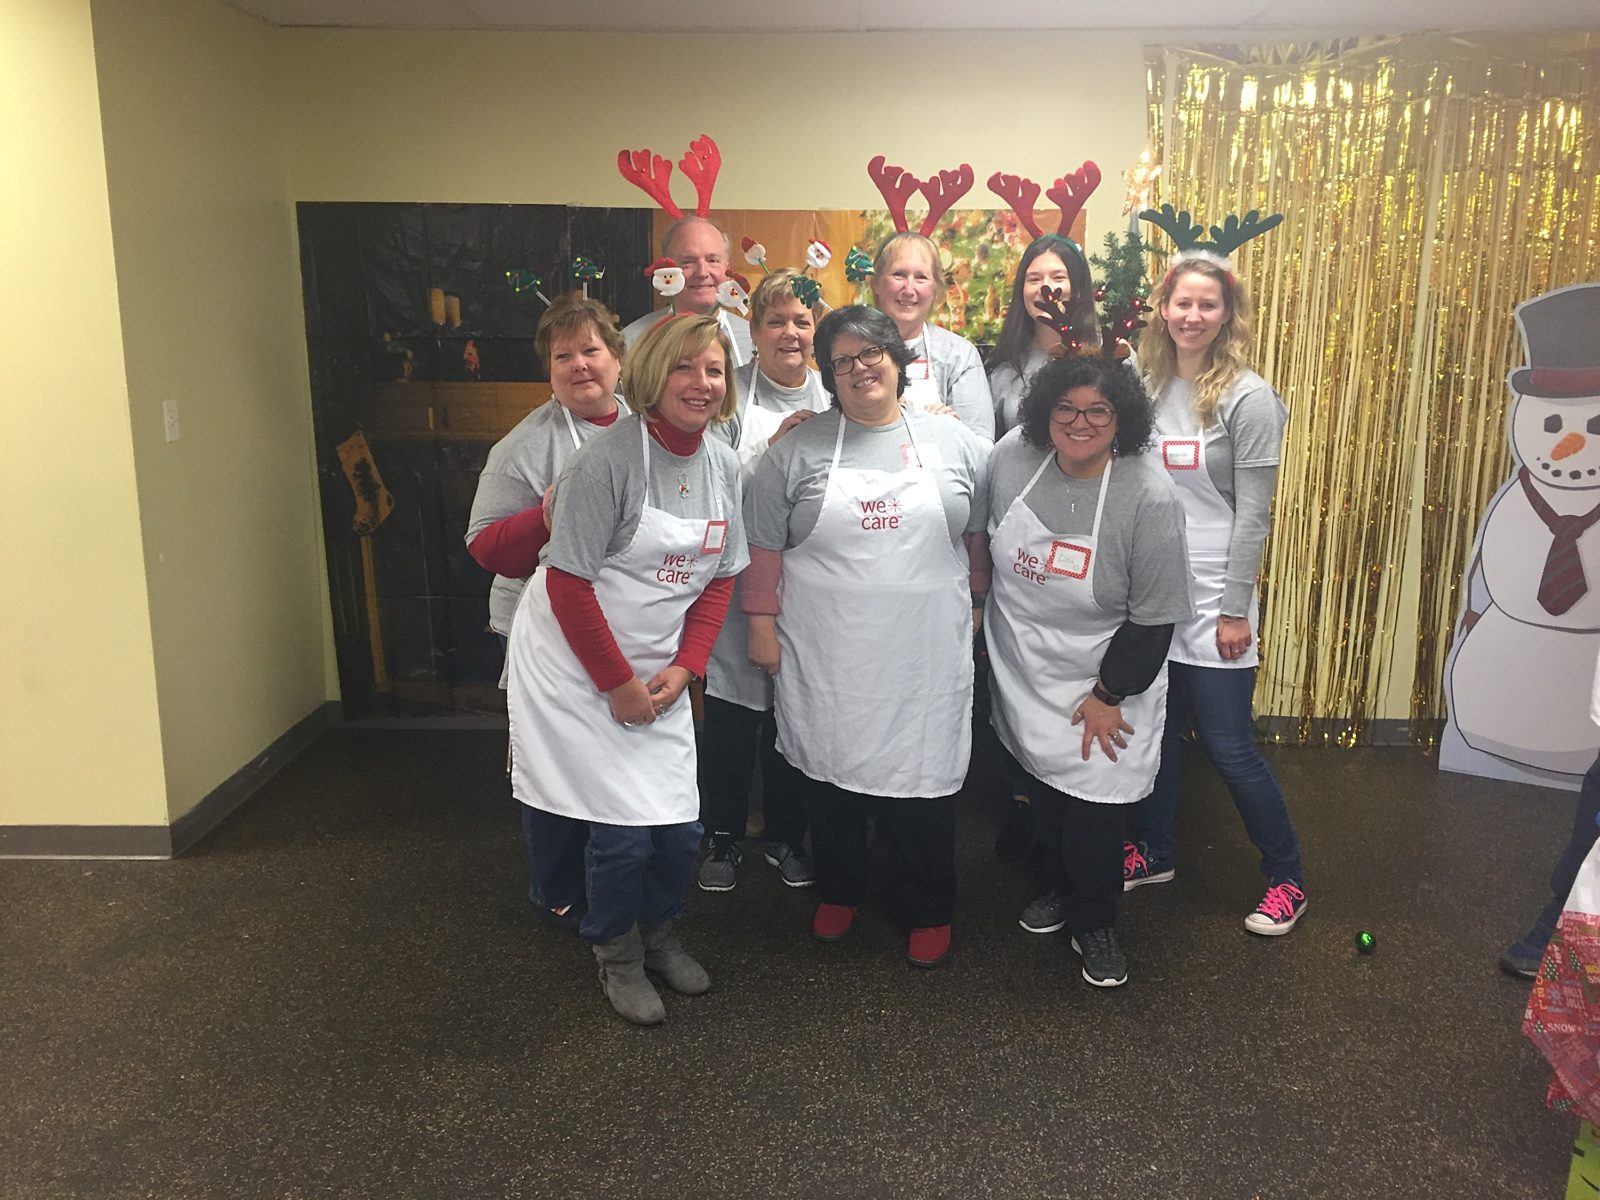 Group picture of nine Premier employees wearing "We Care aprons" and holiday reindeer headbands. There is a gold backdrop hanging behind.